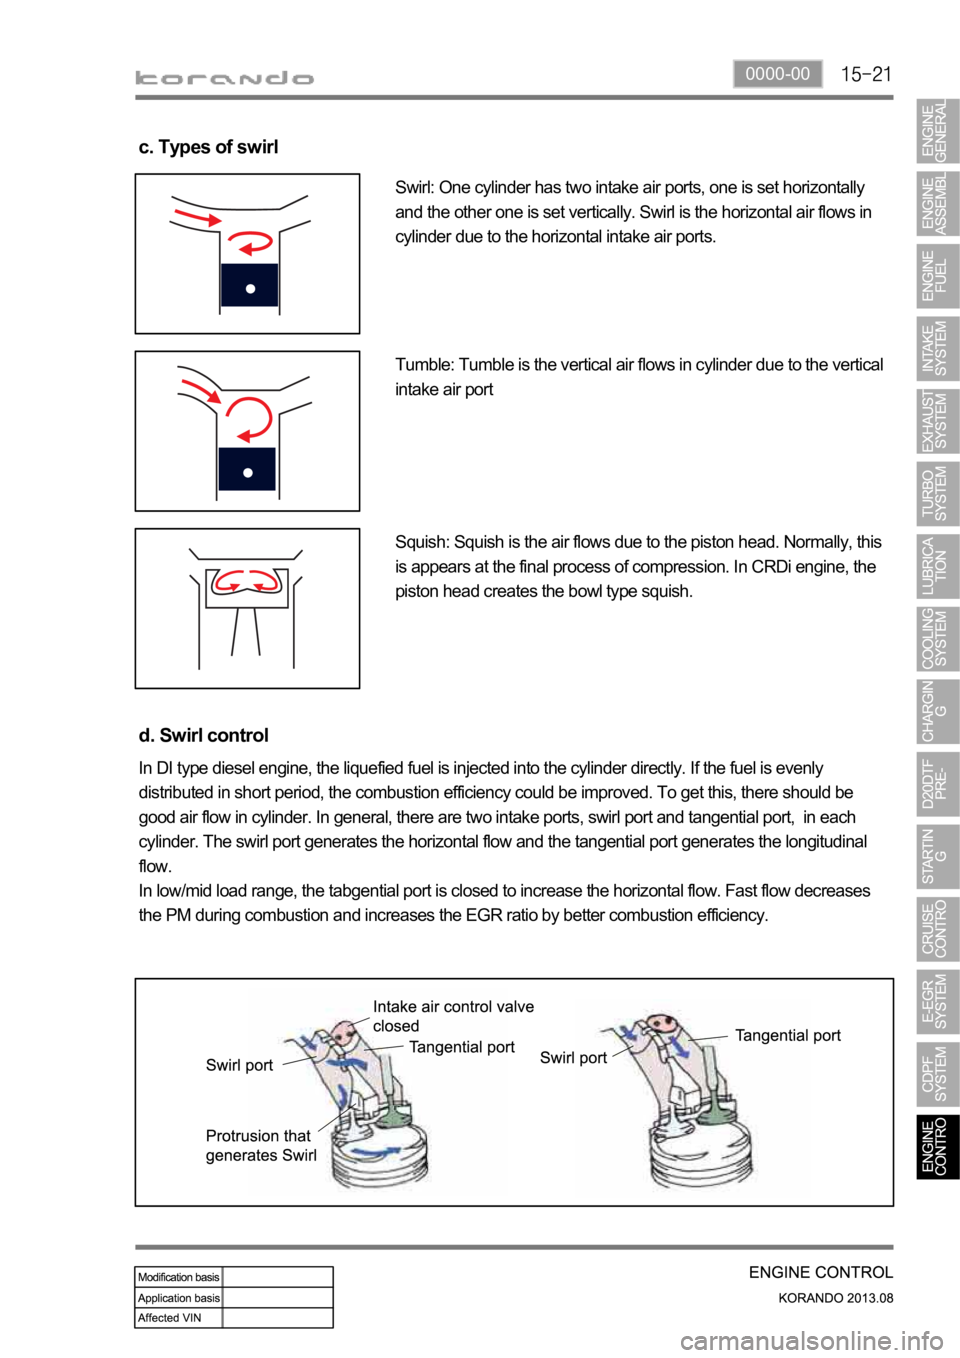 SSANGYONG KORANDO 2013  Service Manual 0000-00
c. Types of swirl
Swirl: One cylinder has two intake air ports, one is set horizontally 
and the other one is set vertically. Swirl is the horizontal air flows in 
cylinder due to the horizont